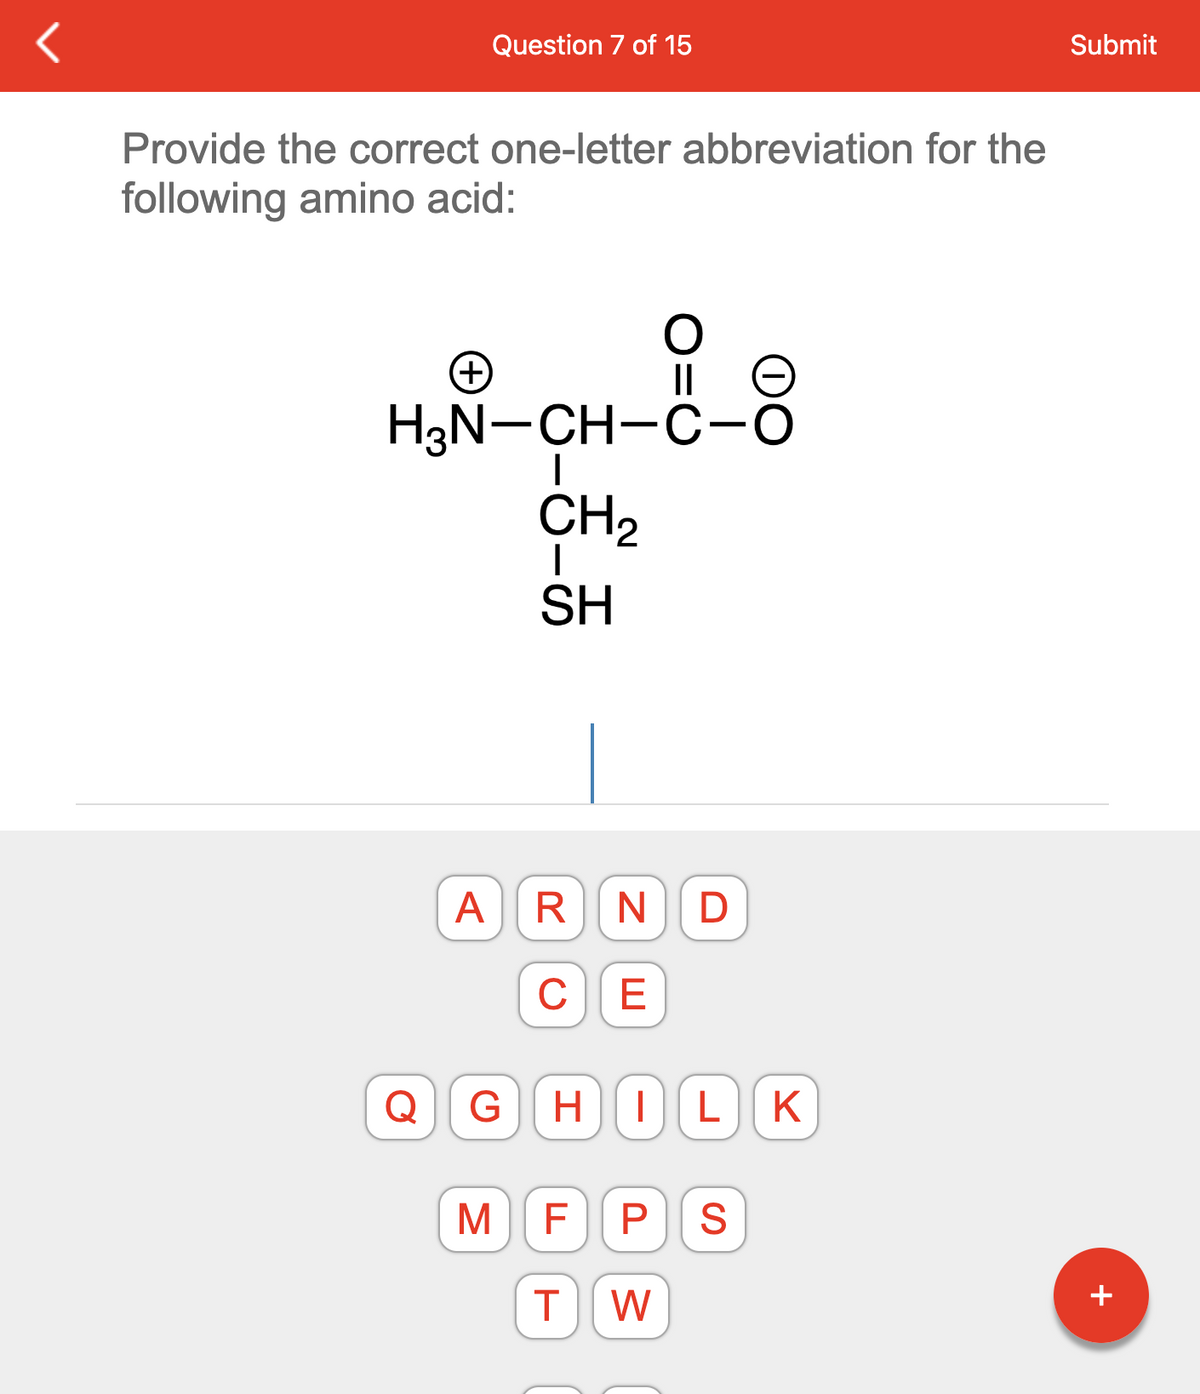 Question 7 of 15
Provide the correct one-letter abbreviation for the
following amino acid:
Q
(+)
H3N-CH-C-O
I
A R
с
G
CH₂
I
SH
M
N
E
D
HILK
F P S
T W
Submit
+